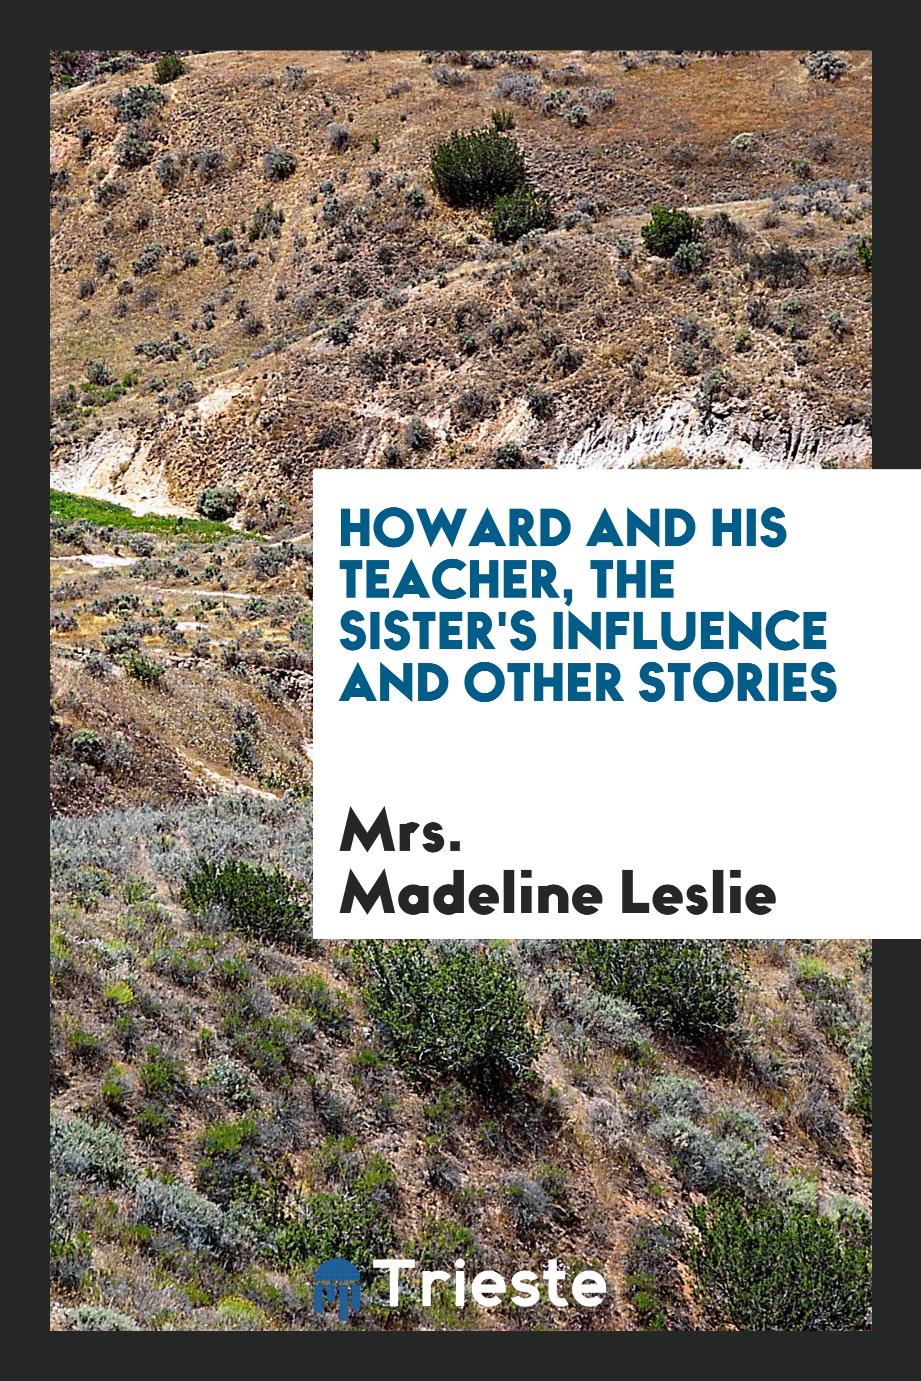 Howard and his teacher, the sister's influence and other stories